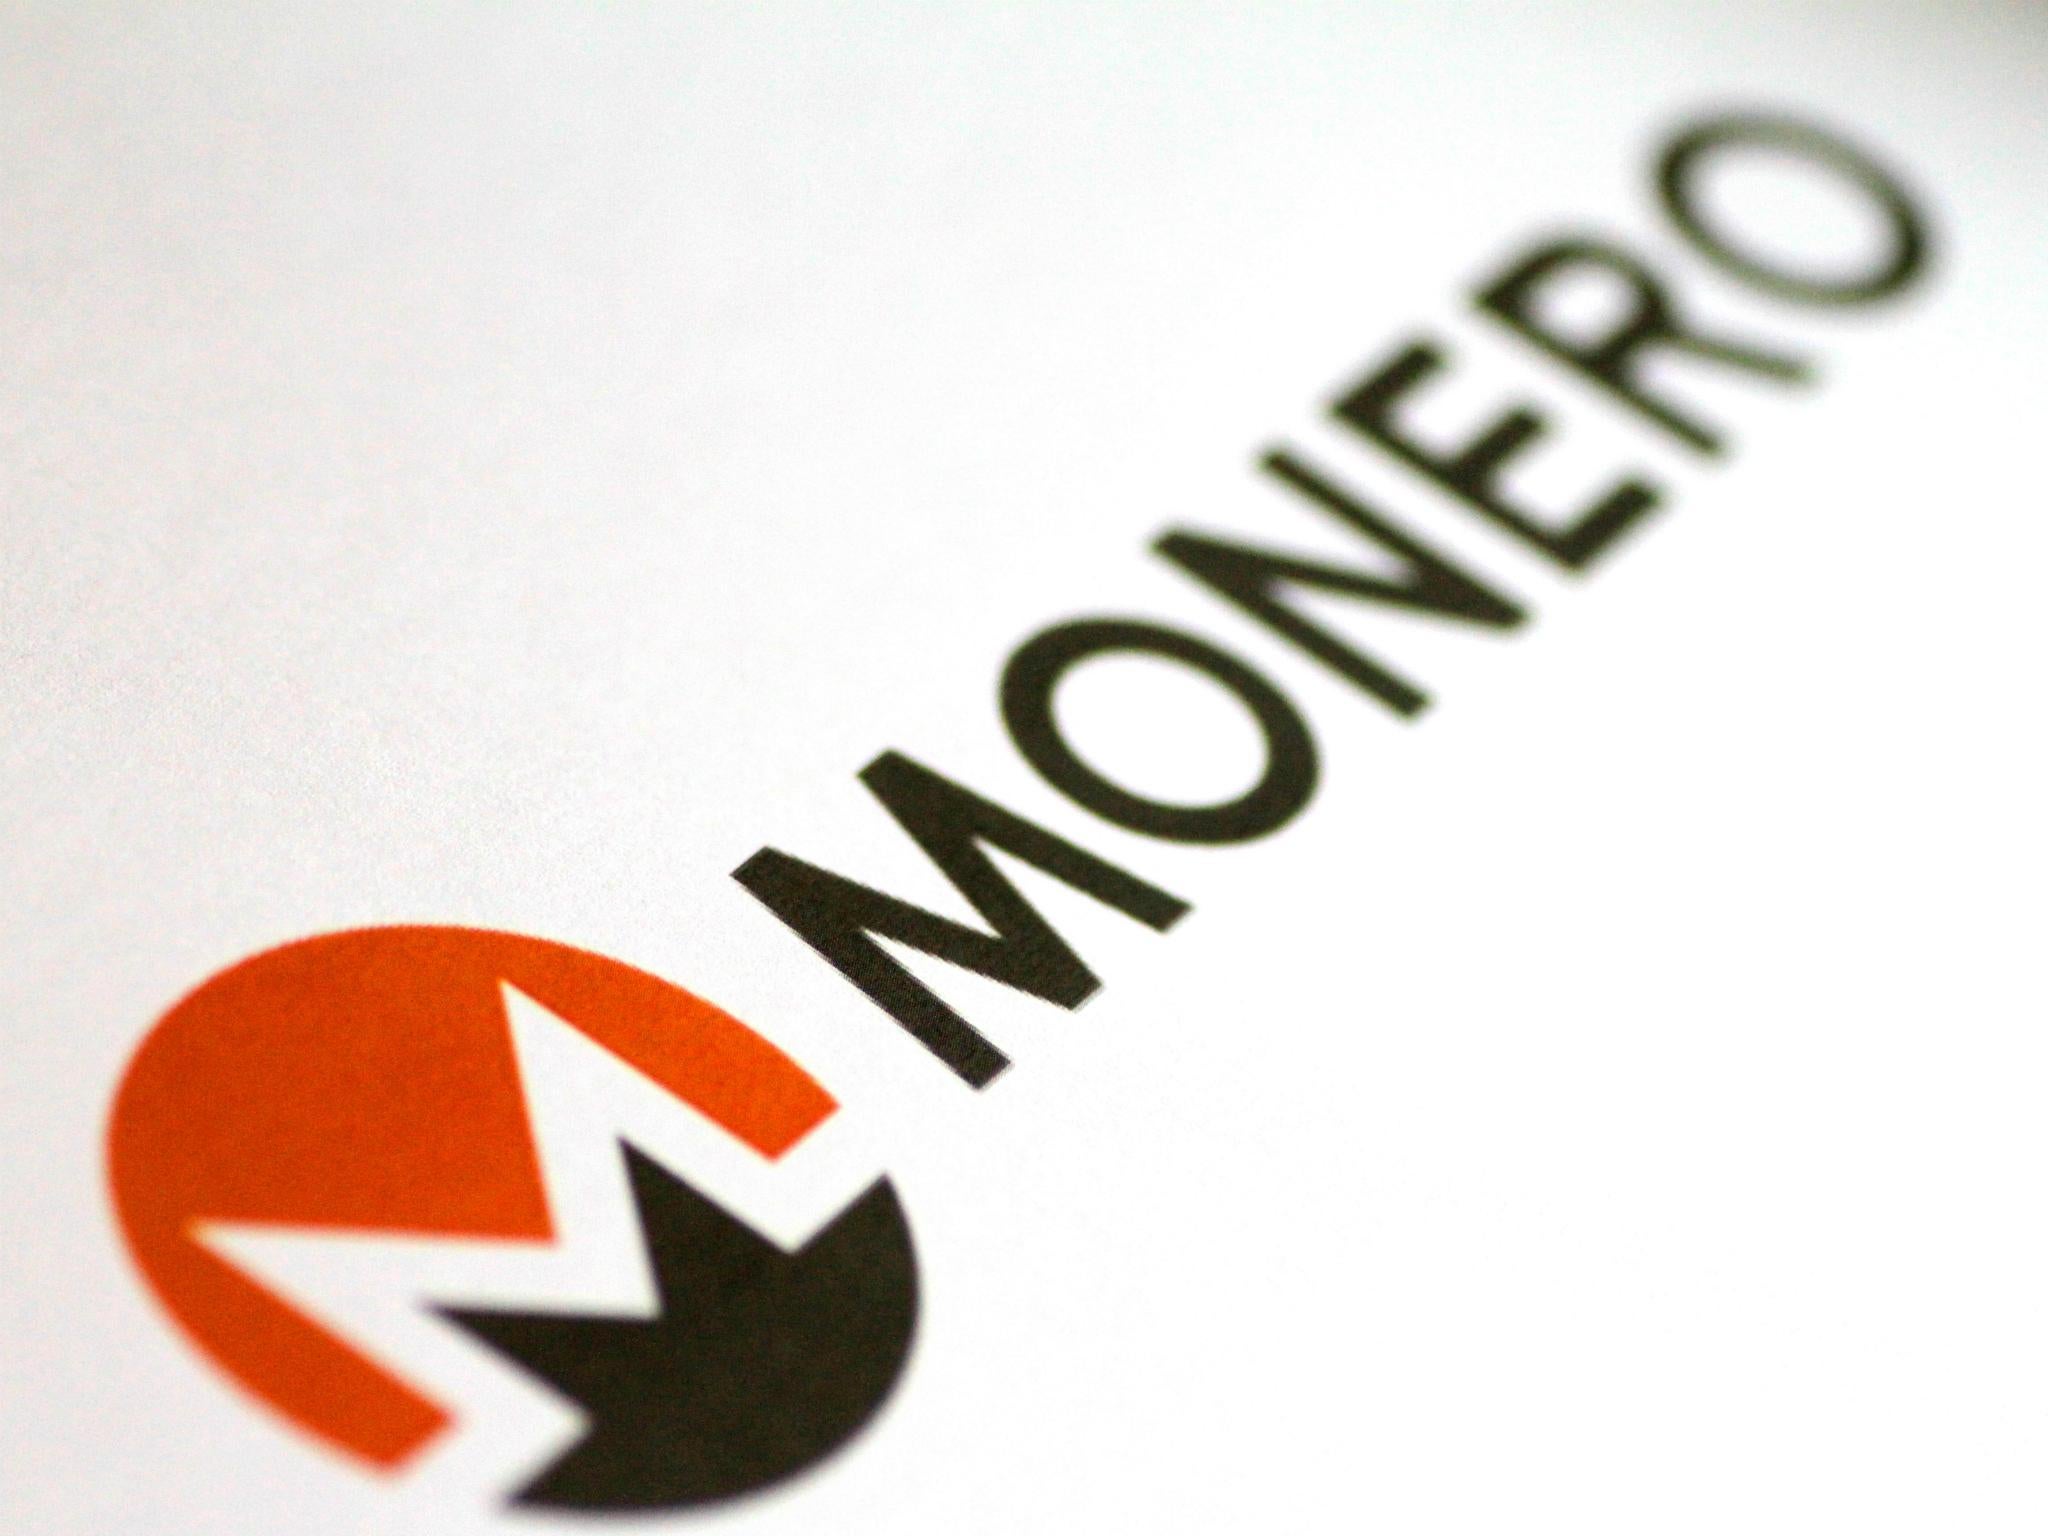 The Monero cryptocurrency logo is seen in this illustration photo January 8, 2018